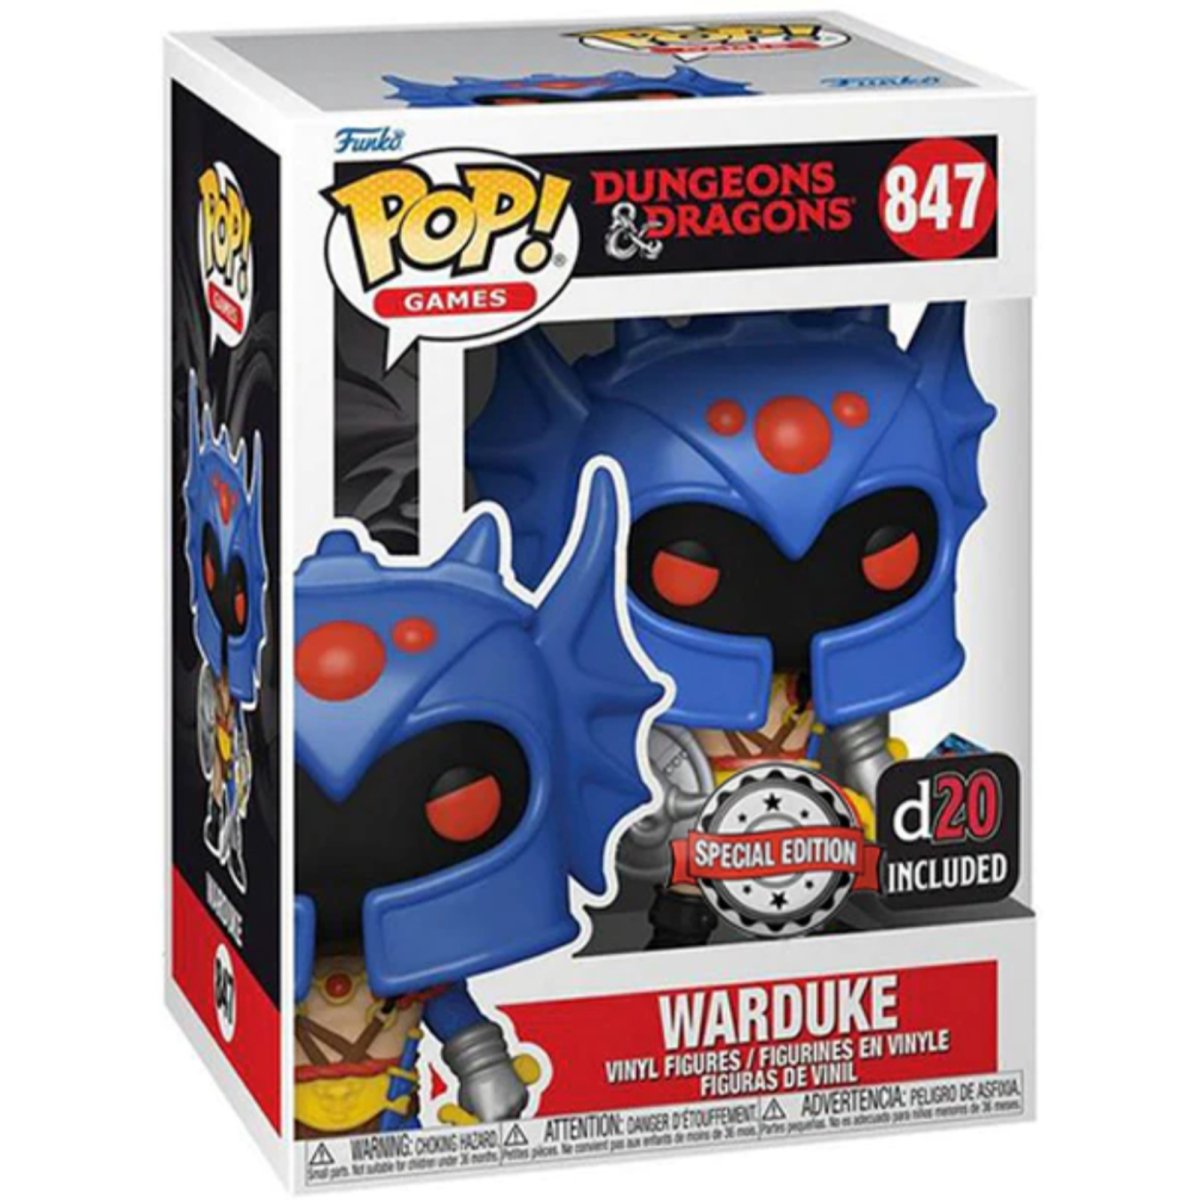 Dungeons & Dragons - Warduke (Special Edition) #847 - Funko Pop! Vinyl Games - Persona Toys